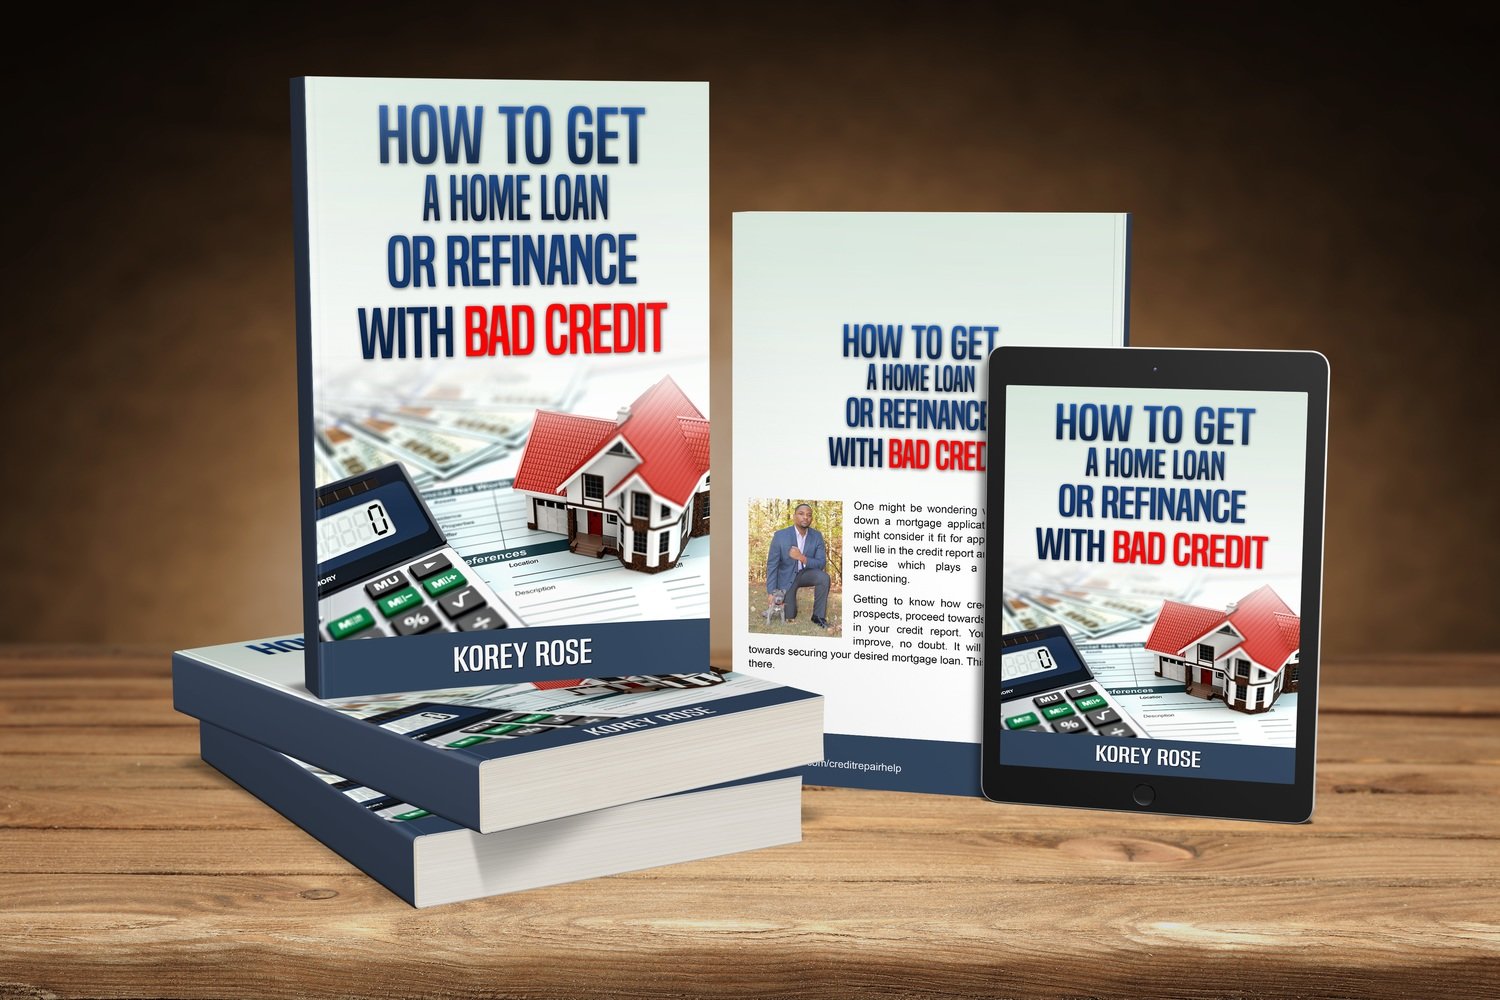 How To Get A Home Loan Or Refinance With Bad Credit